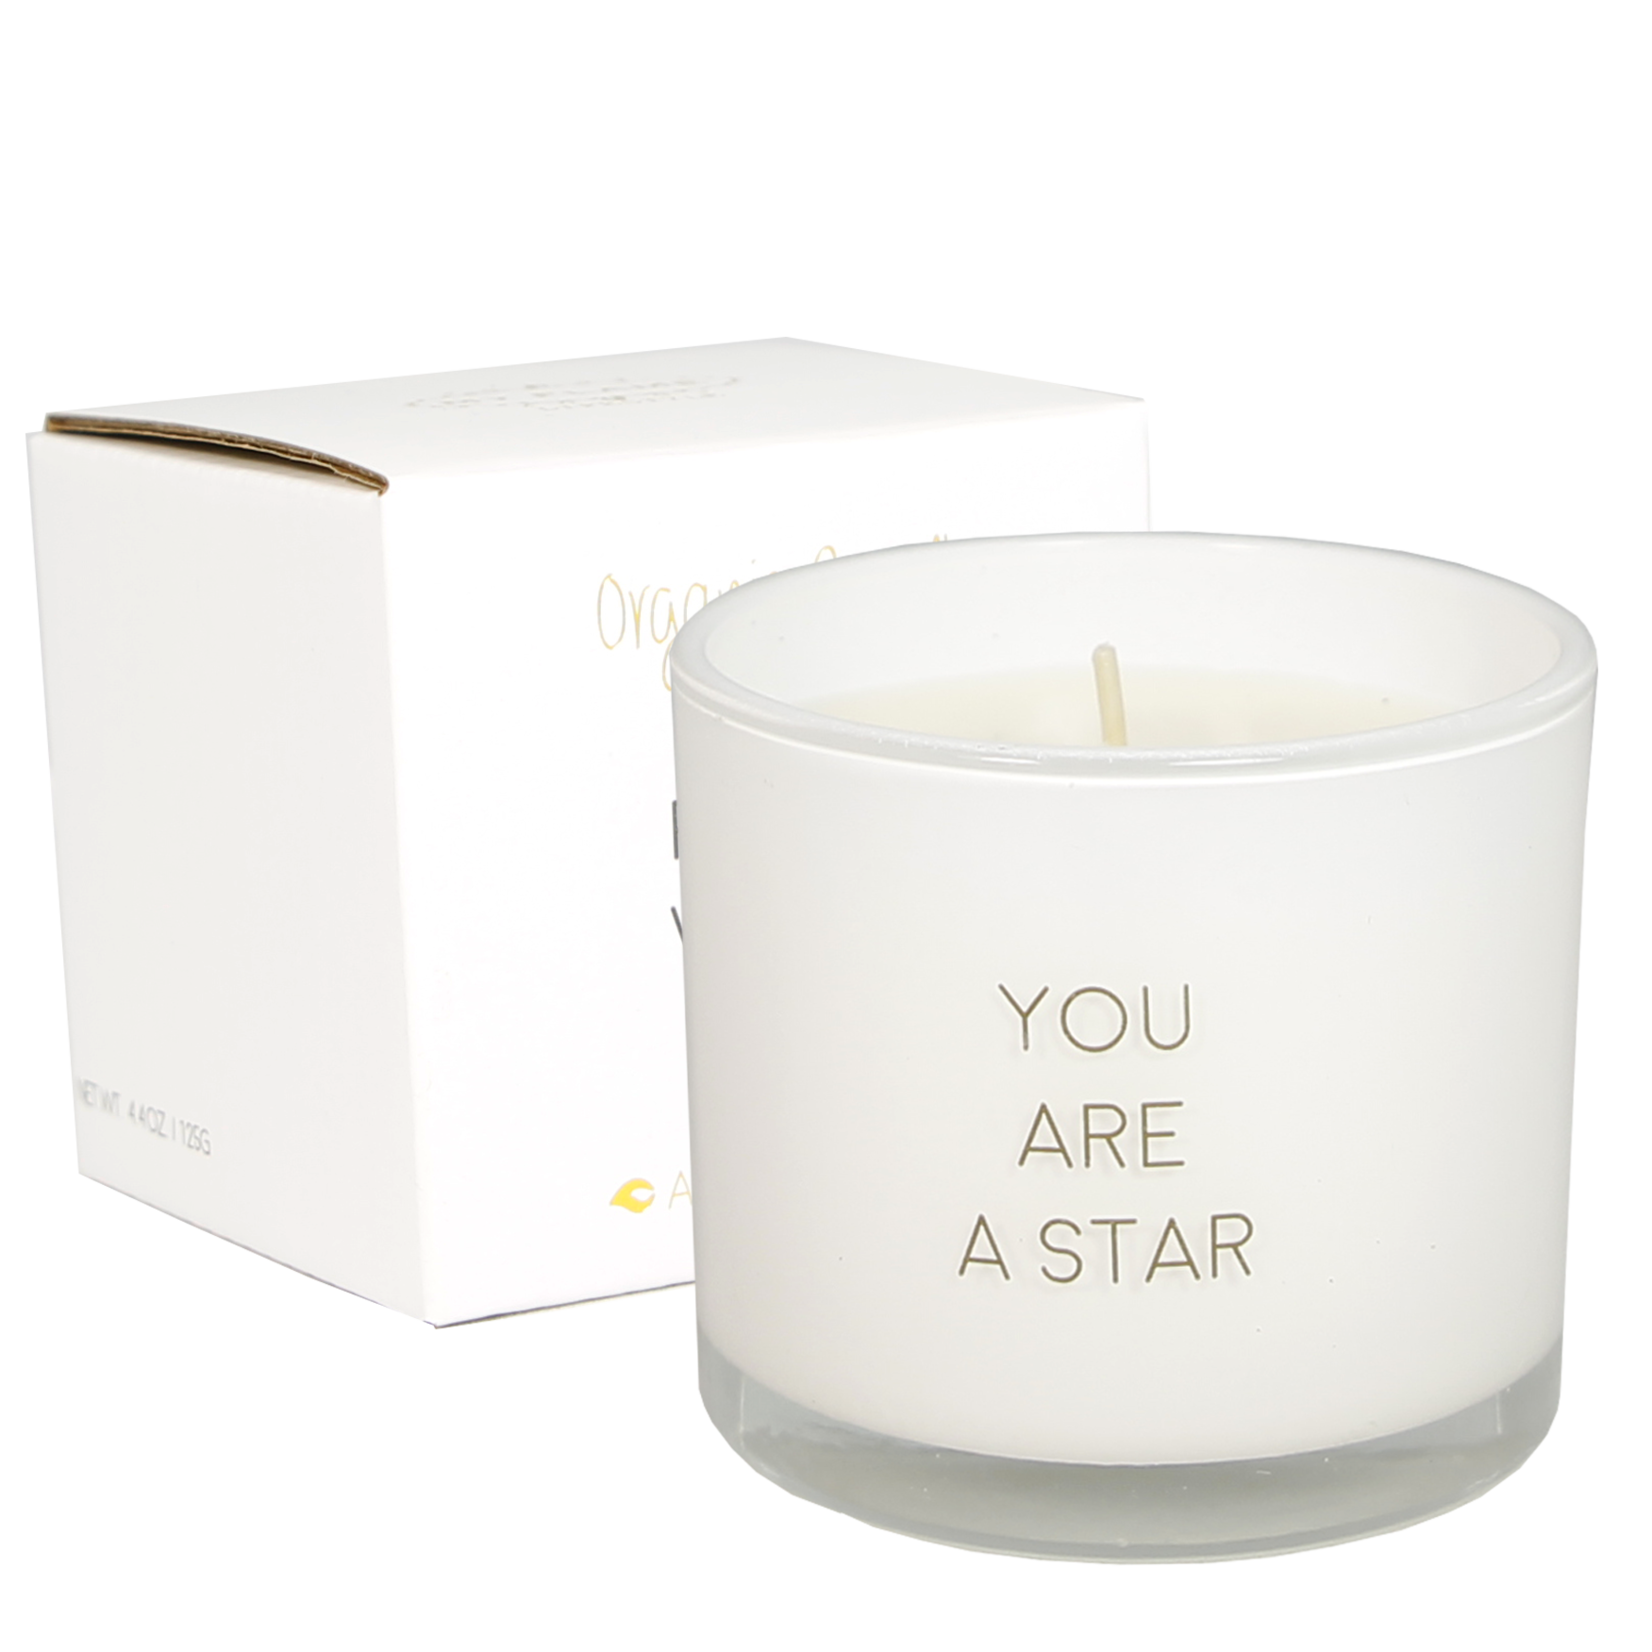 My Flame Geurkaars met wens armband - "You are a star" - Fresh cotton